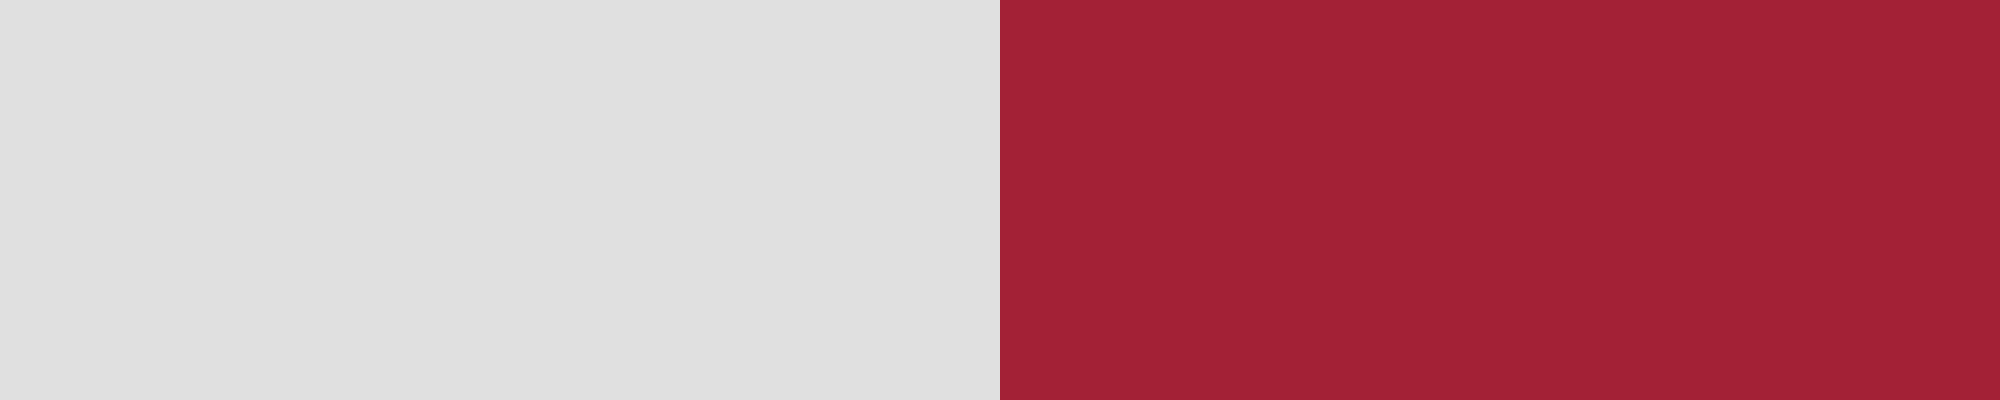 grey and red background